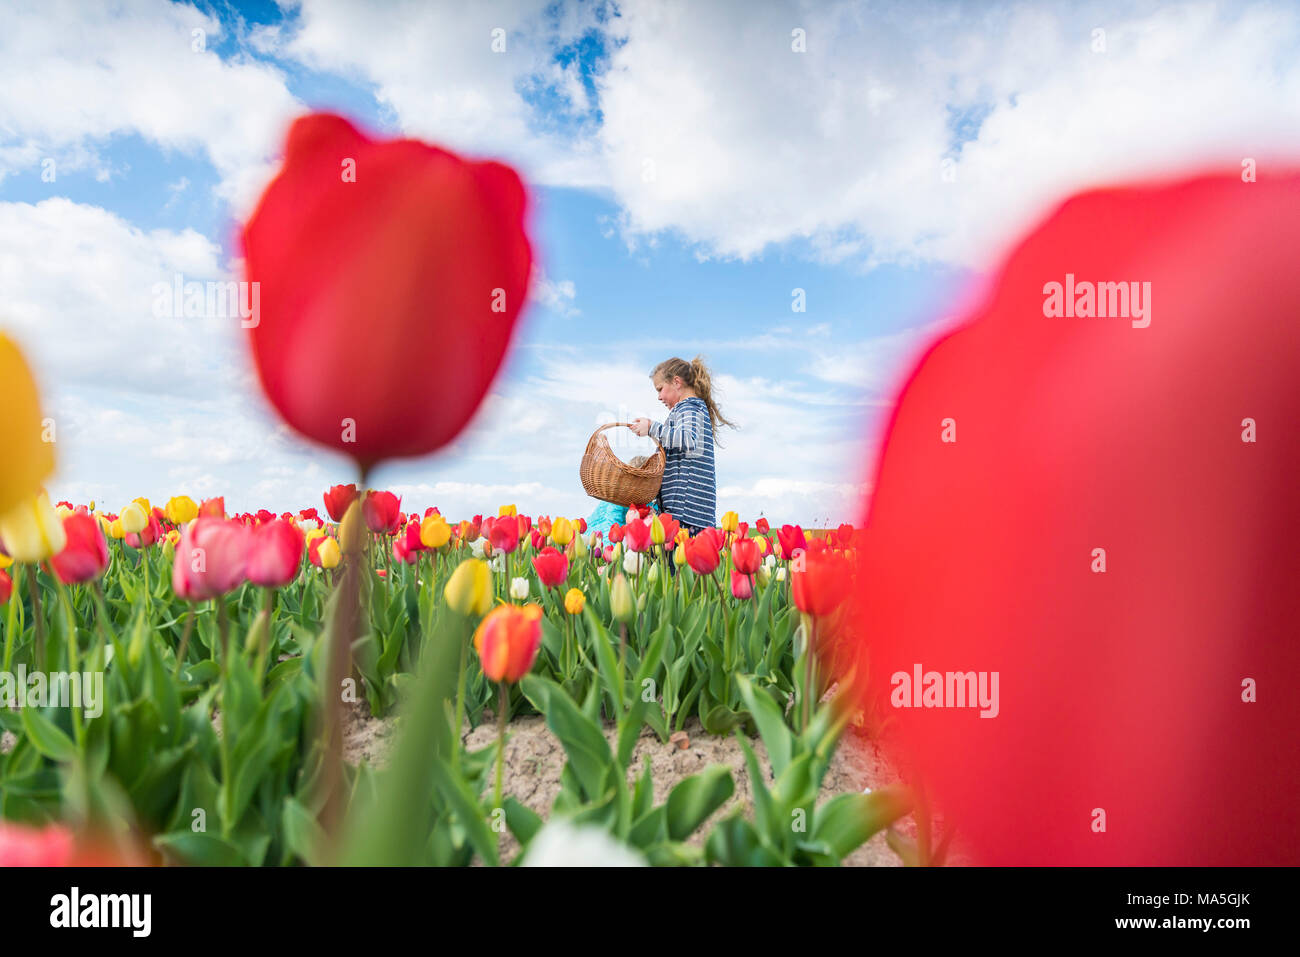 Blonde young girl picking up tulips in a field. Yersekendam, Zeeland province, Netherlands. Stock Photo